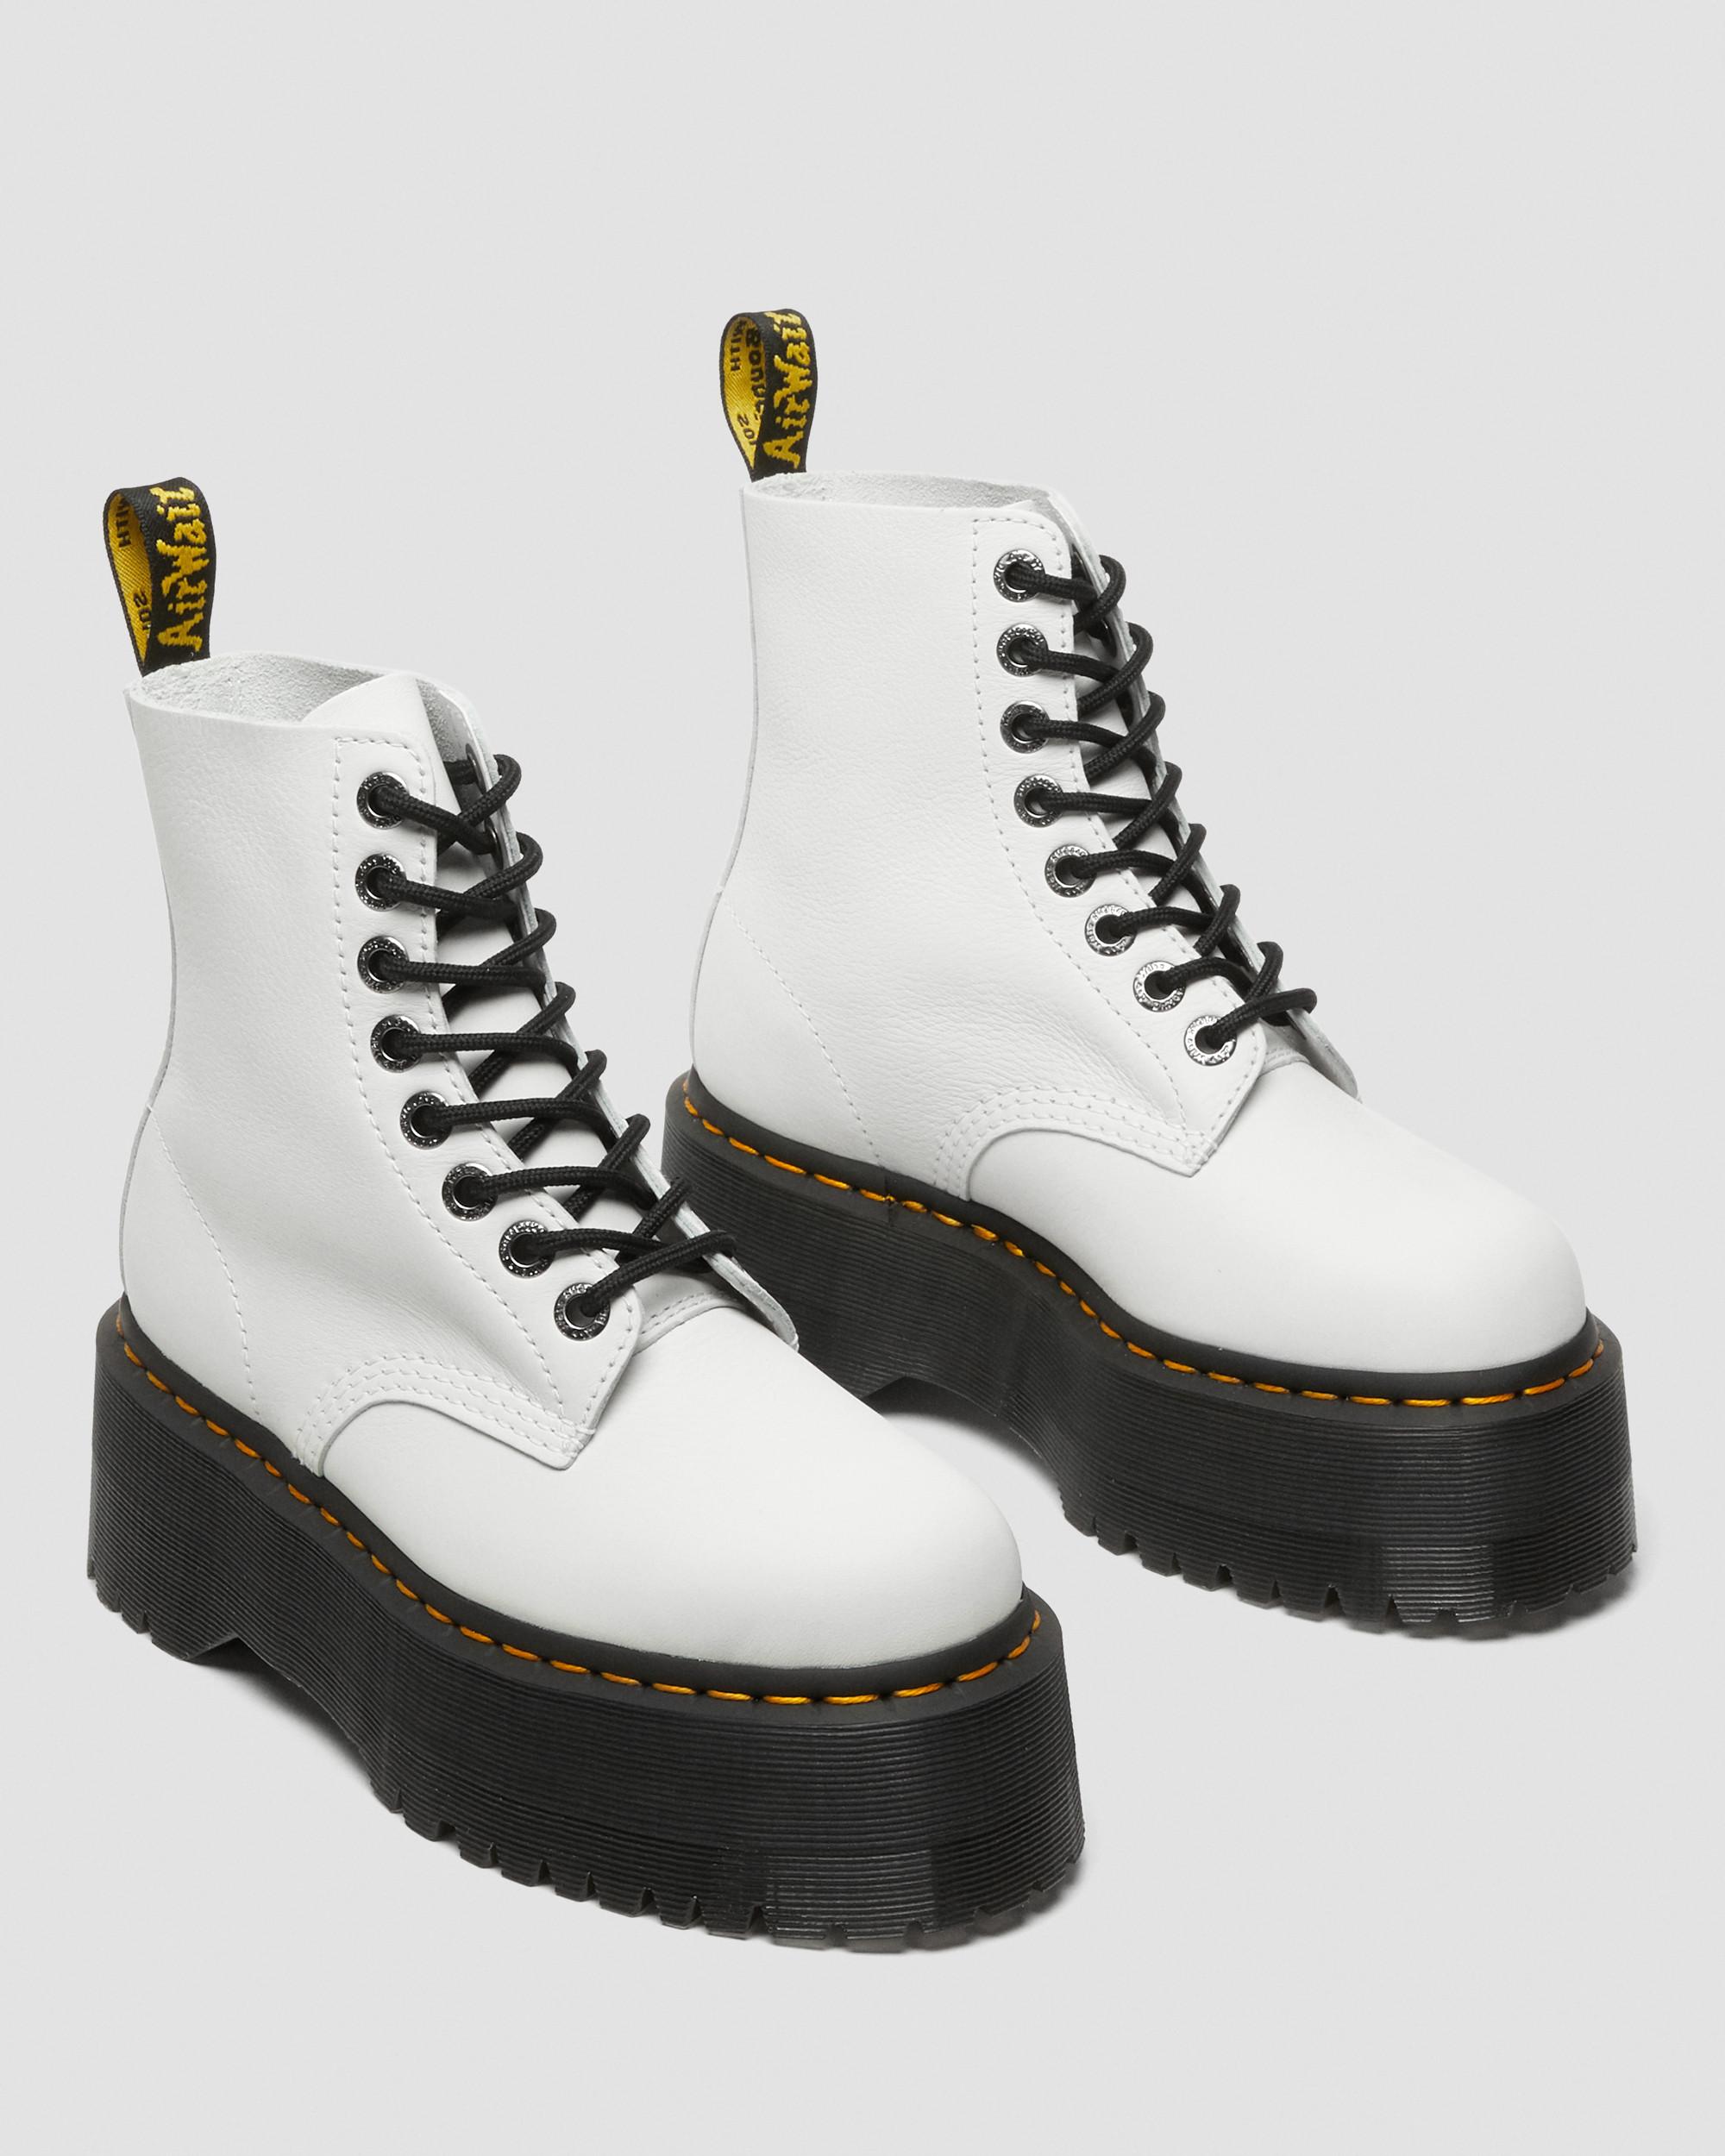 1460 PASCAL MAX1460 Pascal Max Leather Platform Boots Dr. Martens